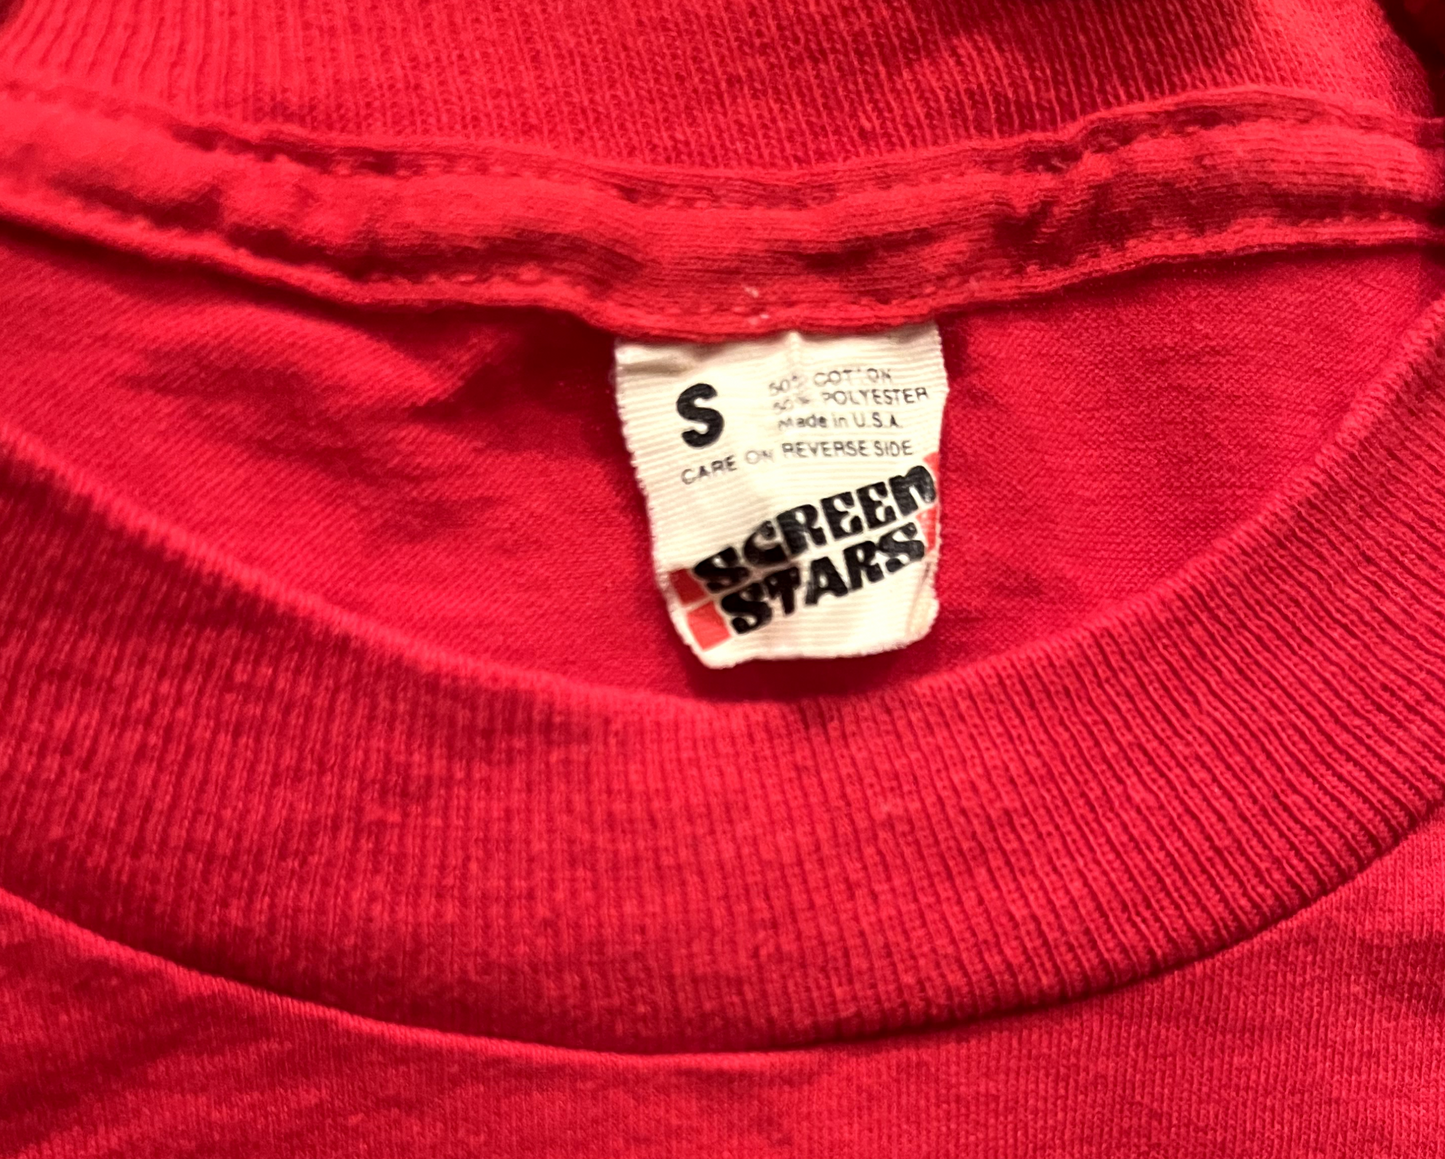 Tag of red coca-cola short sleeve tee.